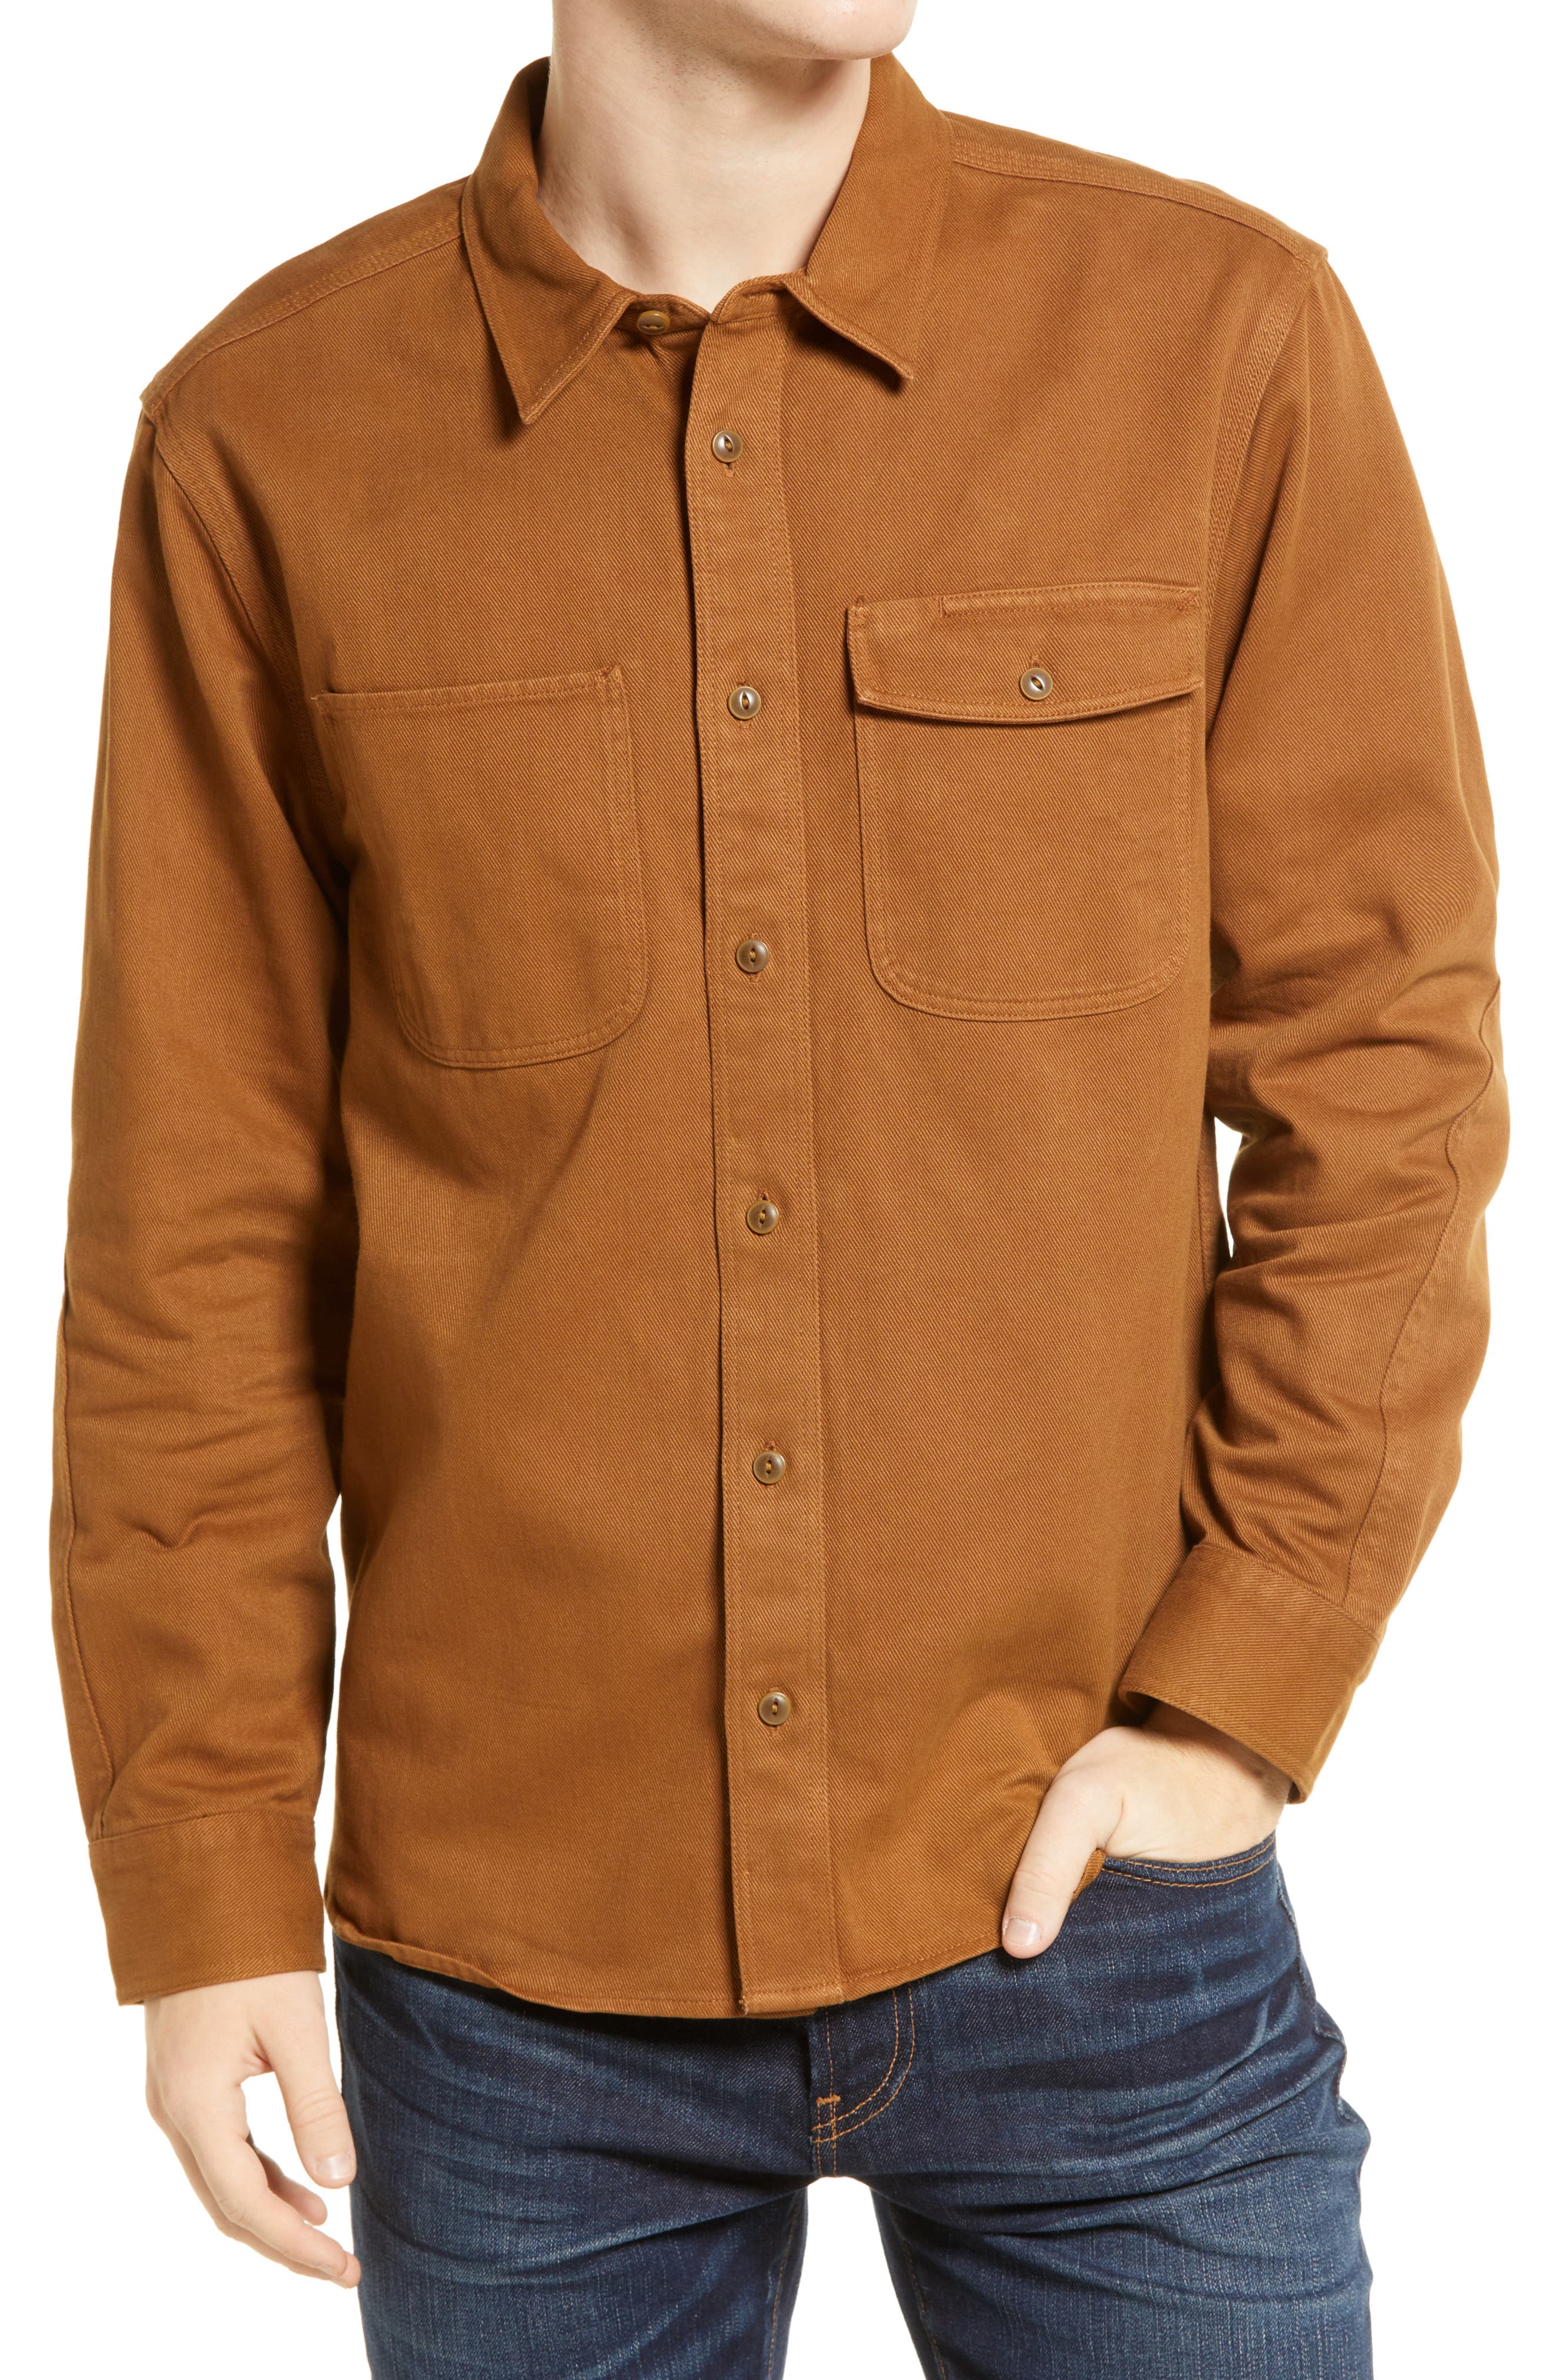 Zimaes-Men Casual Business Corduroy Long Sleeve Button Blouses and Top Shirts